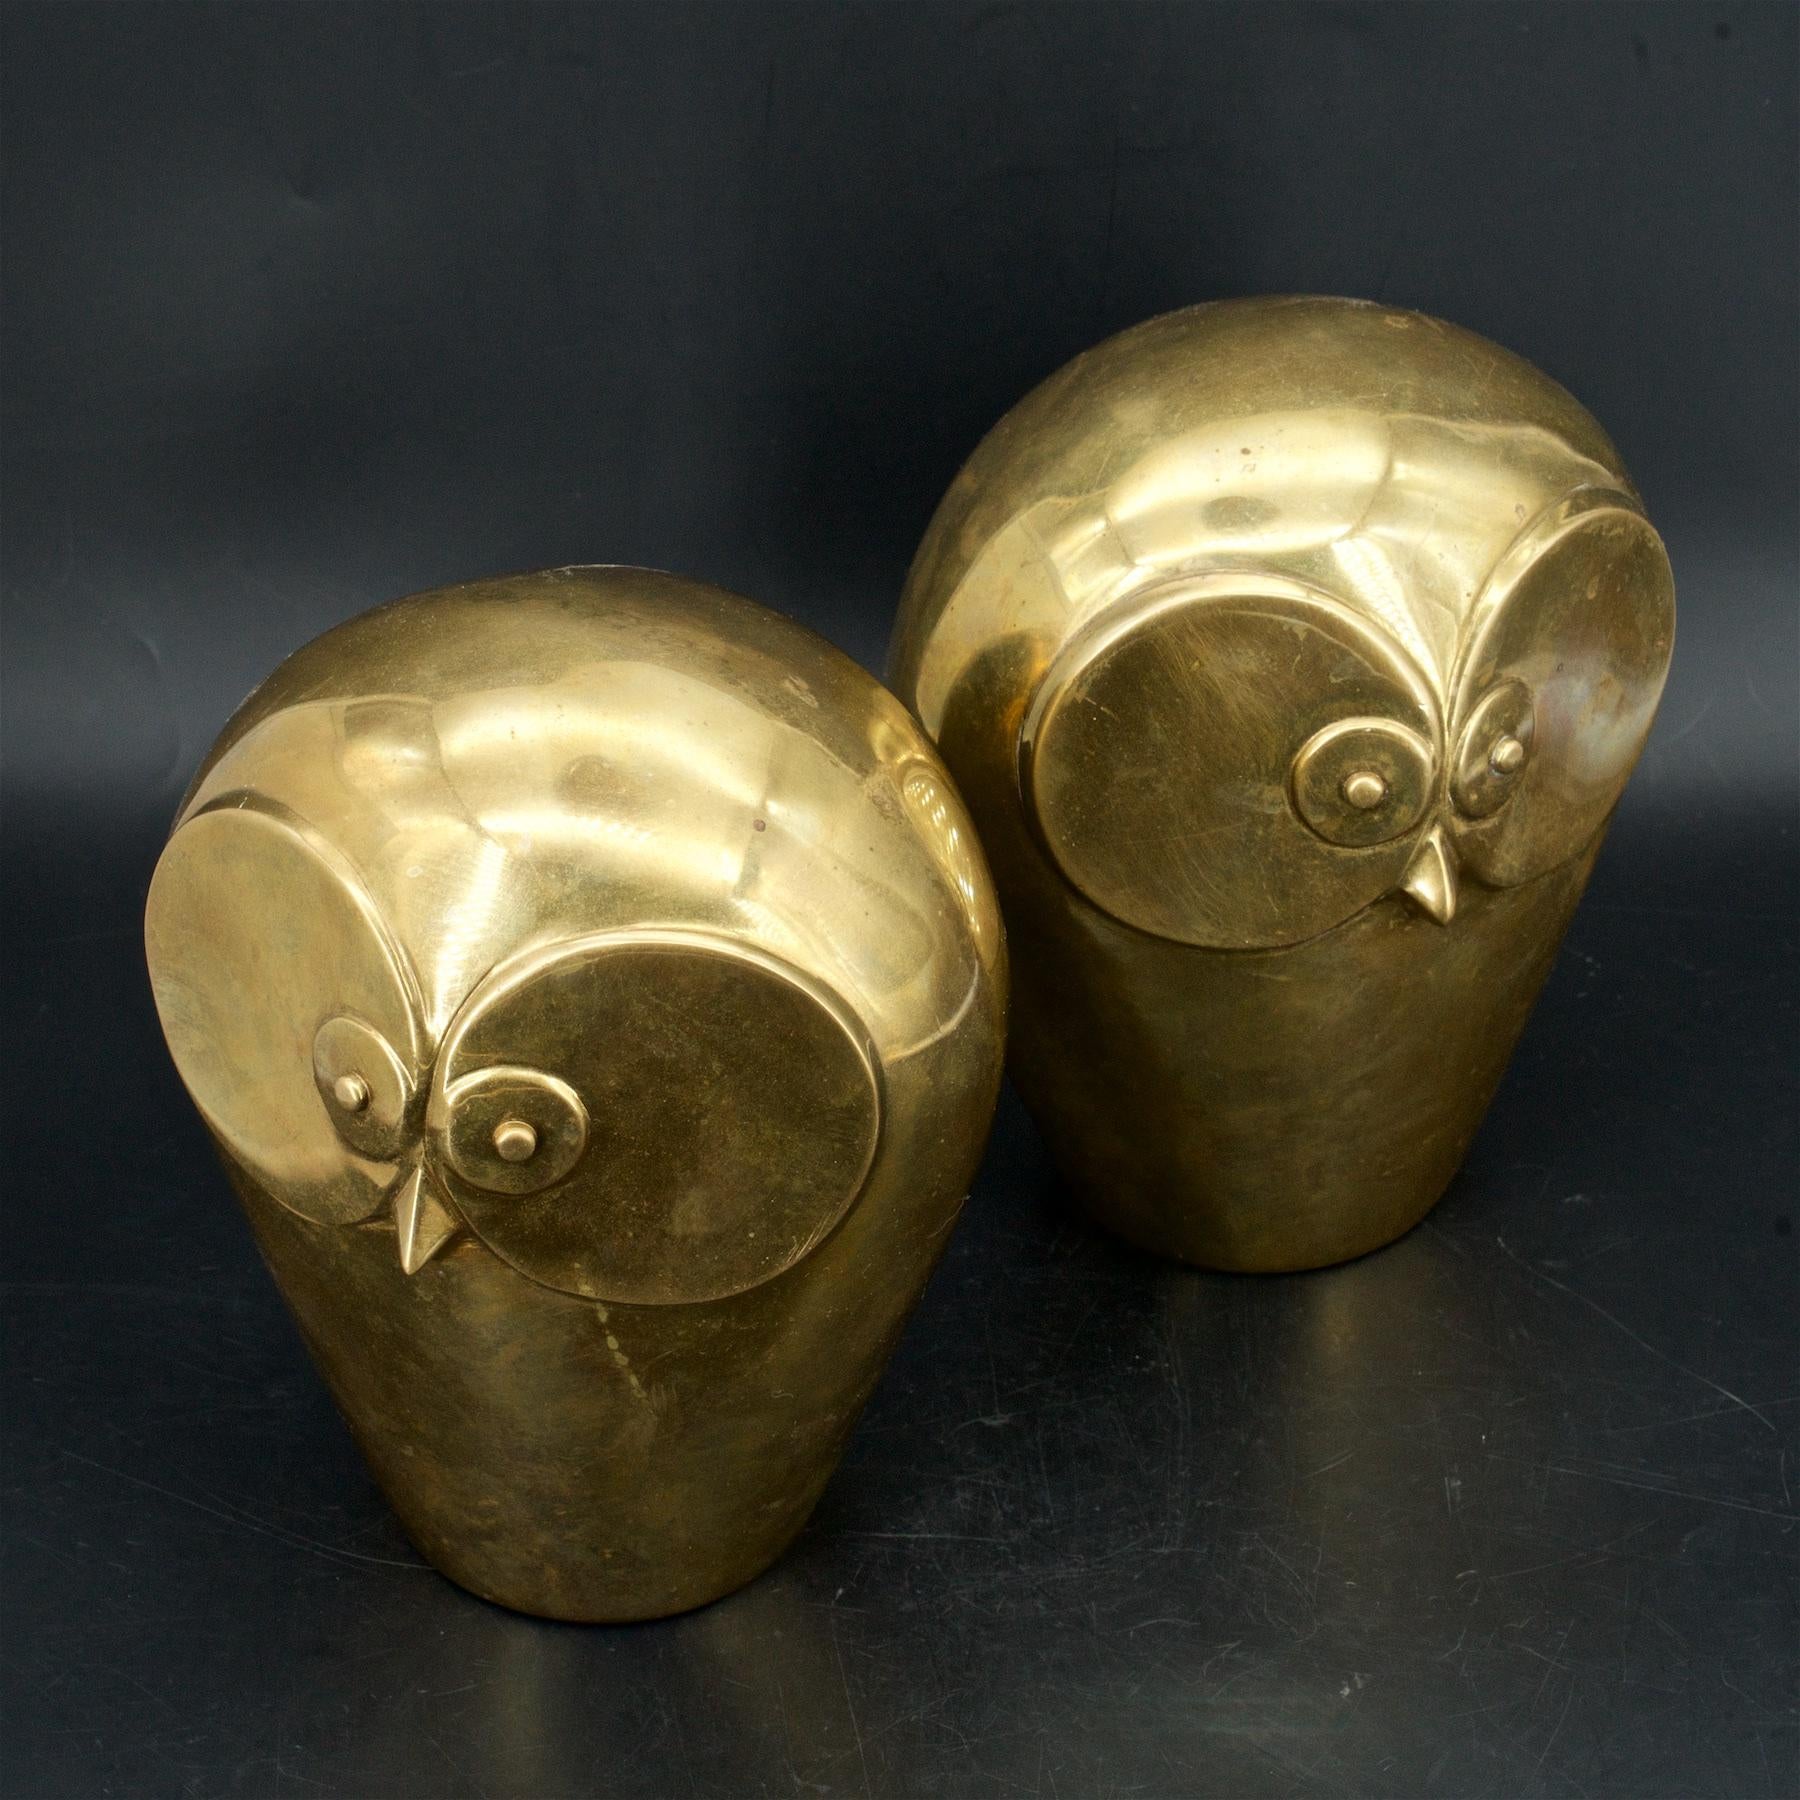 Bulbous and Heavy Decorative Bookends or Sculptures. Weighing 8.25 lbs. Each. Patina, and some scratches but no dents.